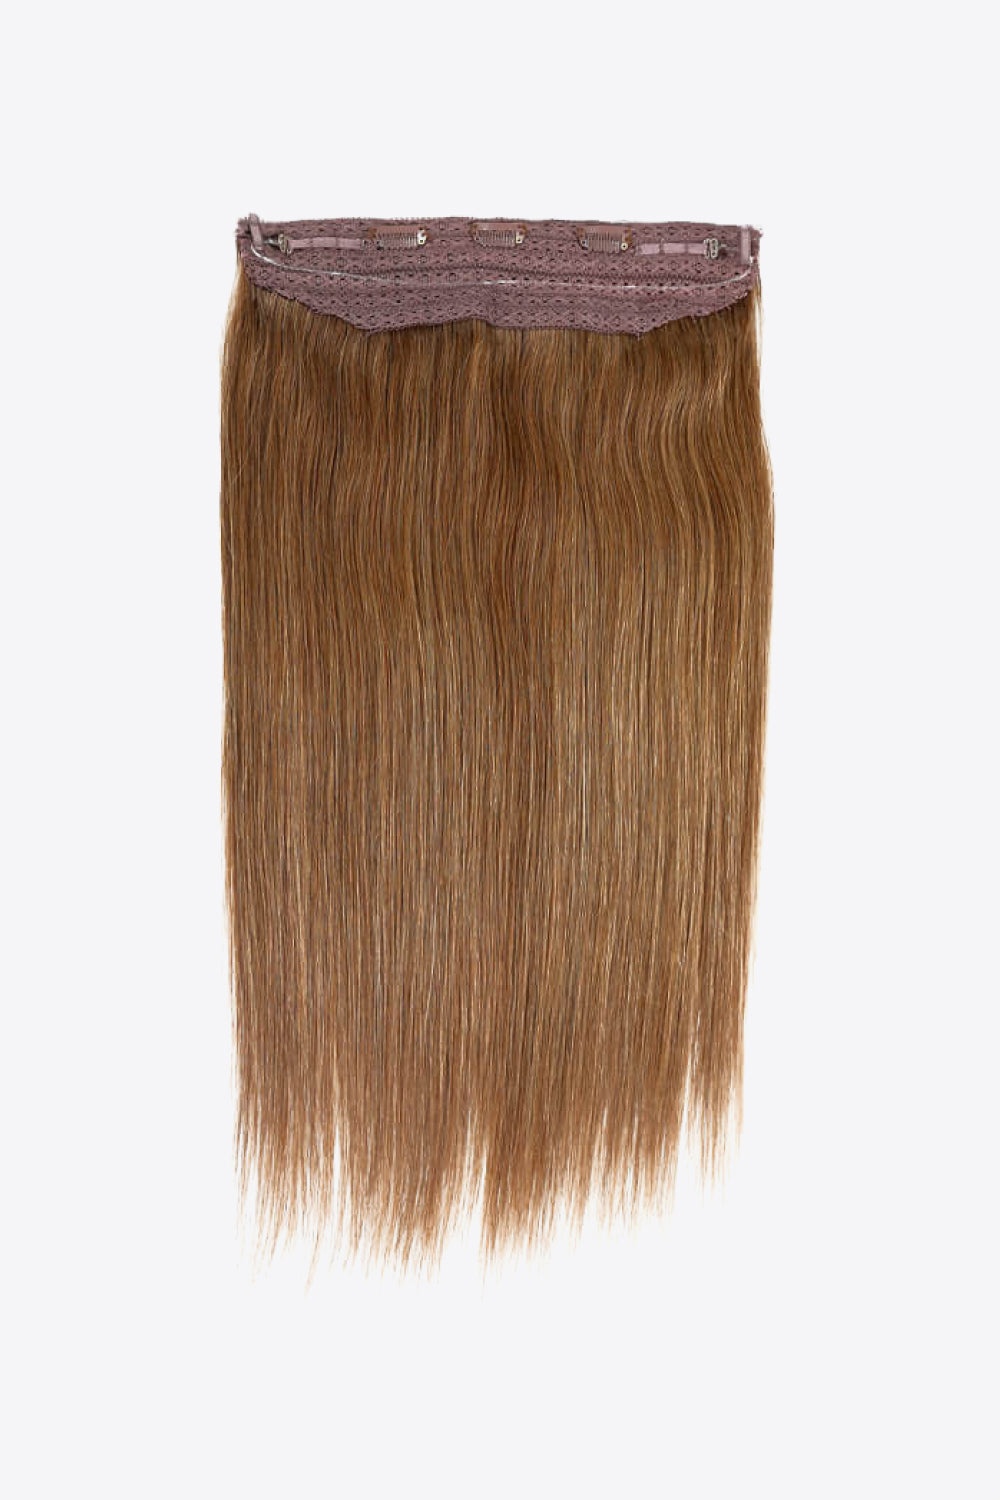 18" HUMAN INDIAN HAIR 80g Halo Extention Real Premium